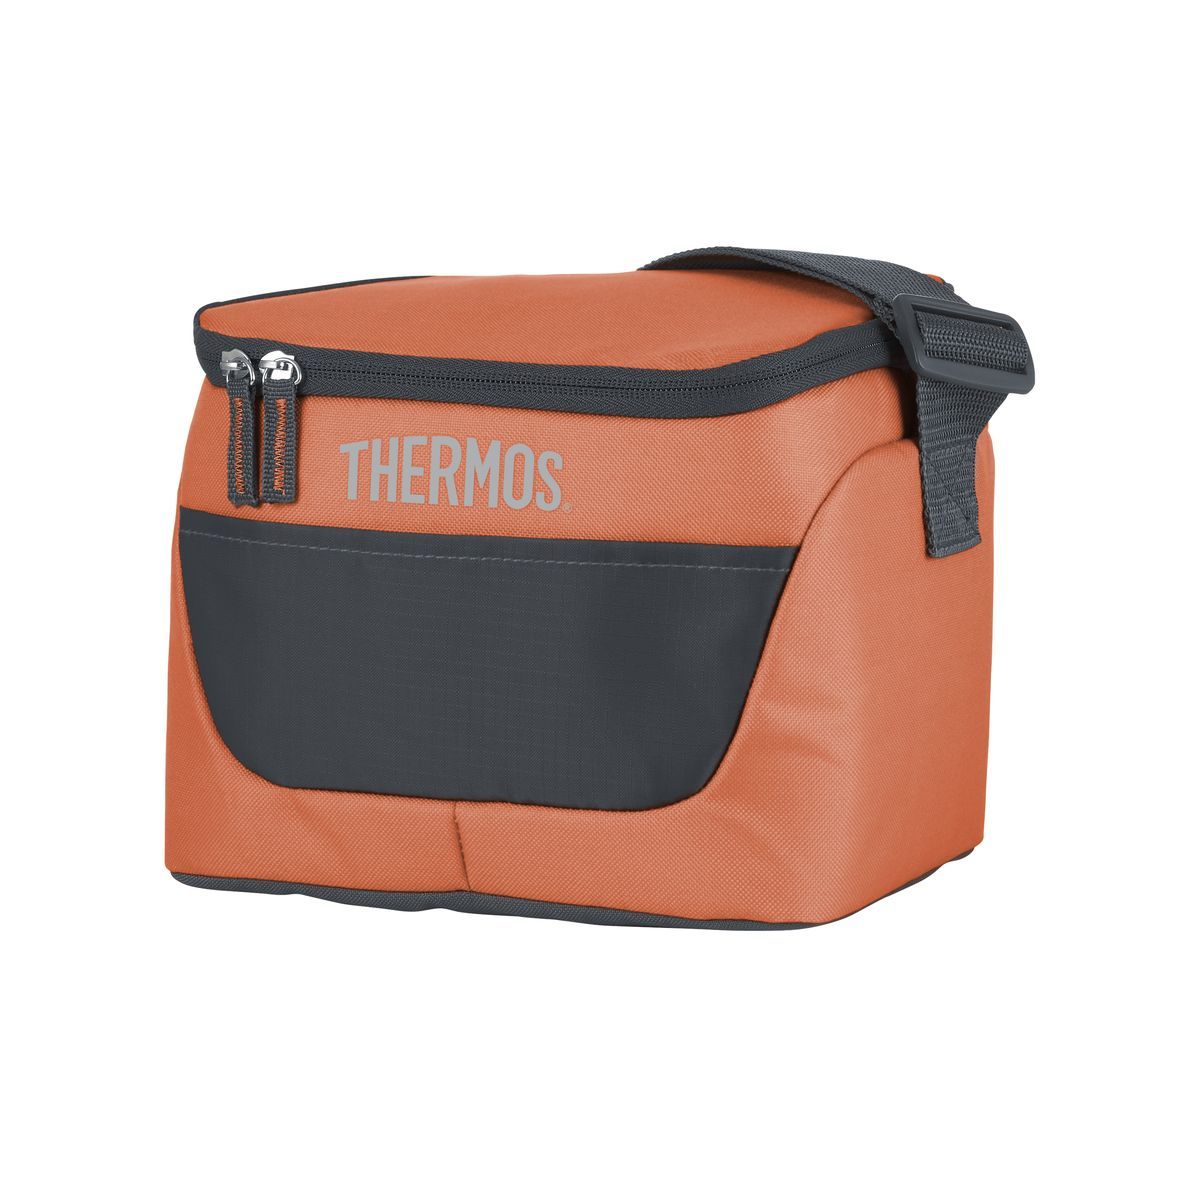 Sac isotherme 30 litres - 4 couleurs